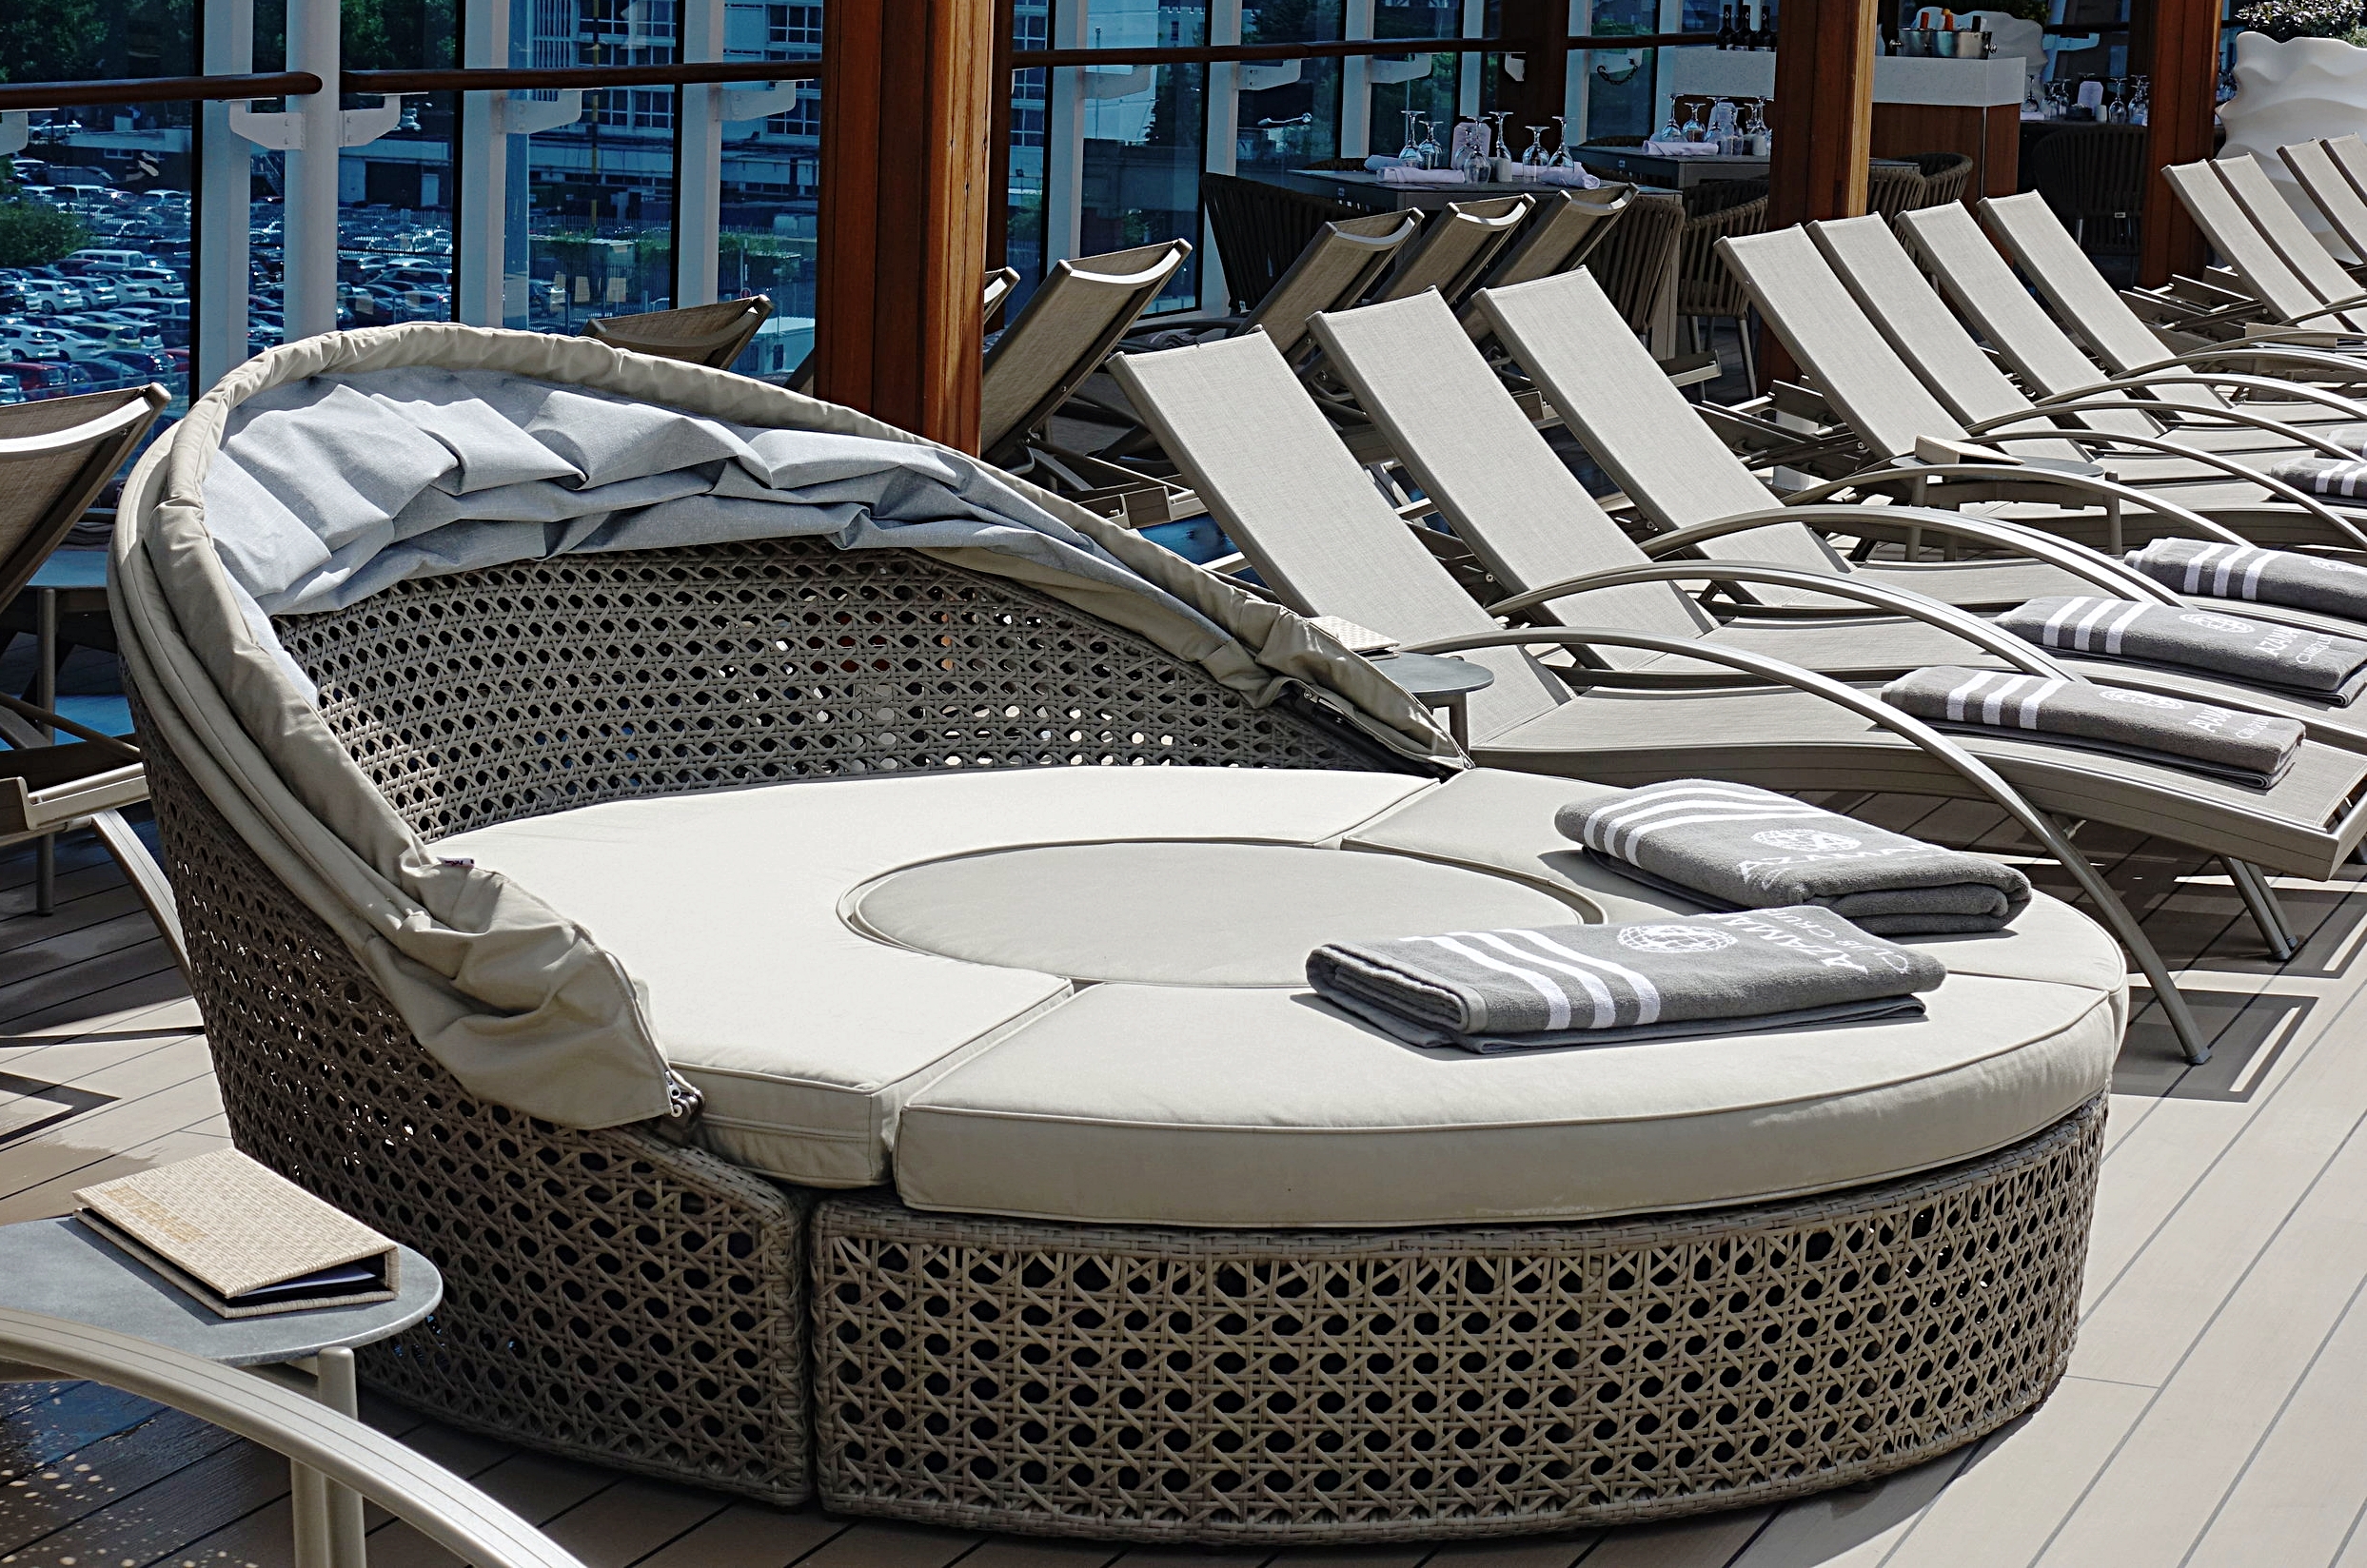  Daybeds on the pool deck.  